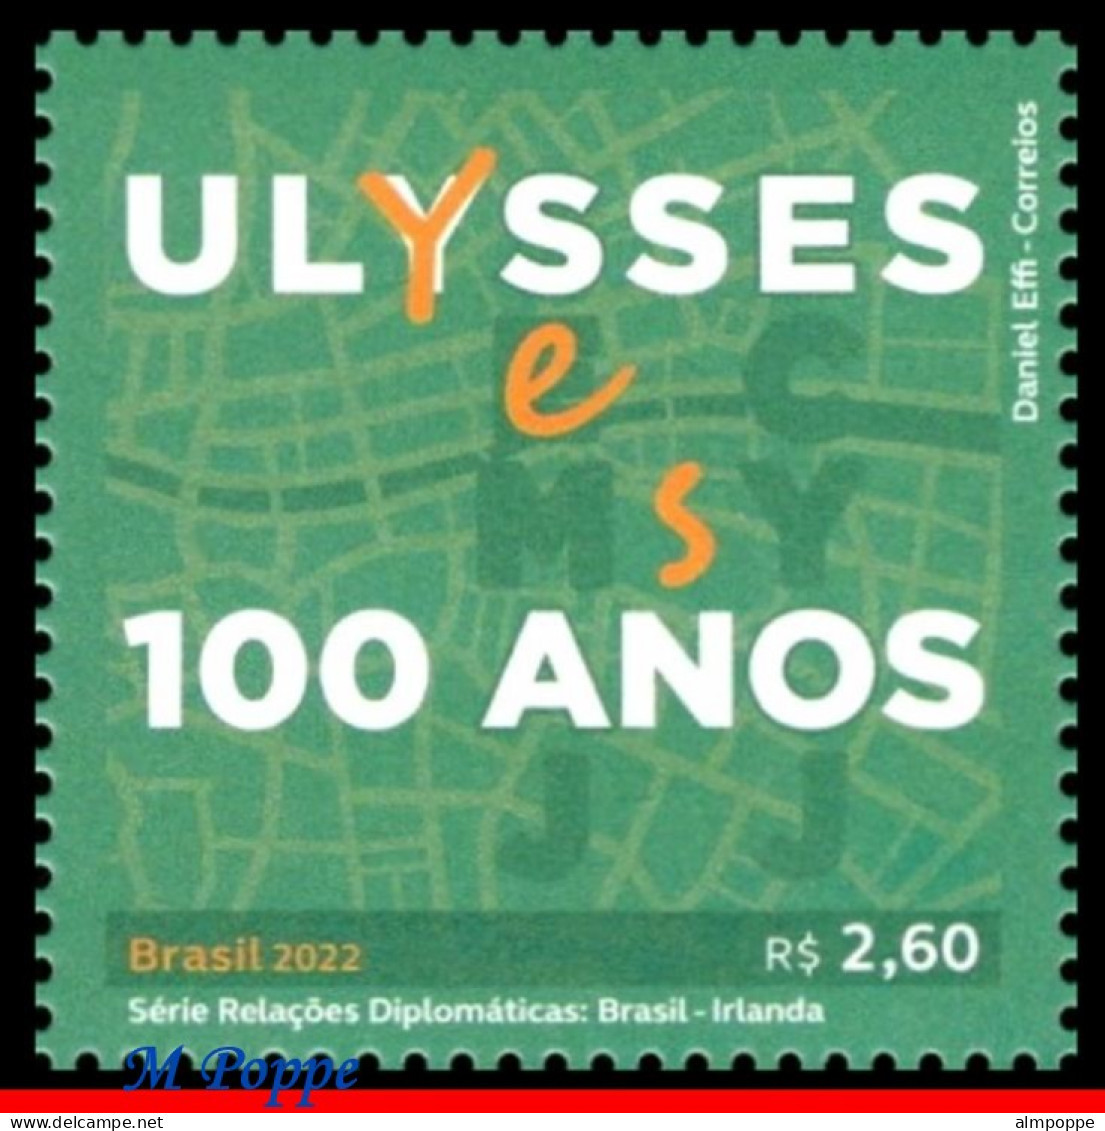 Ref. BR-V2022-06-F BRAZIL 2022 - DIPLOMATIC RELATIONS WITHIRELAND, 100 YEARS OF ULYSSES, SHEET MNH, FAMOUS PEOPLE 8V - Neufs